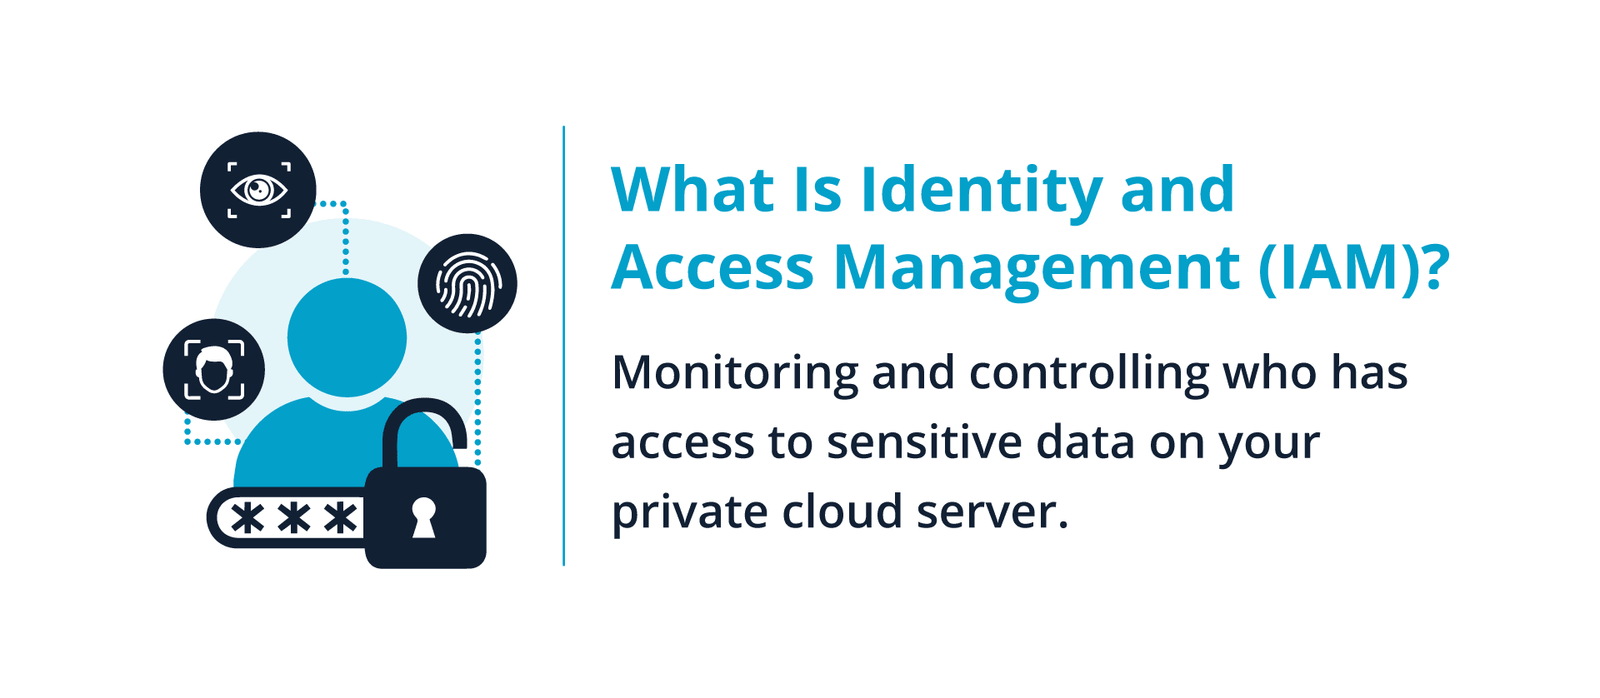 Keeping tabs on who has access to your private cloud server is a must.